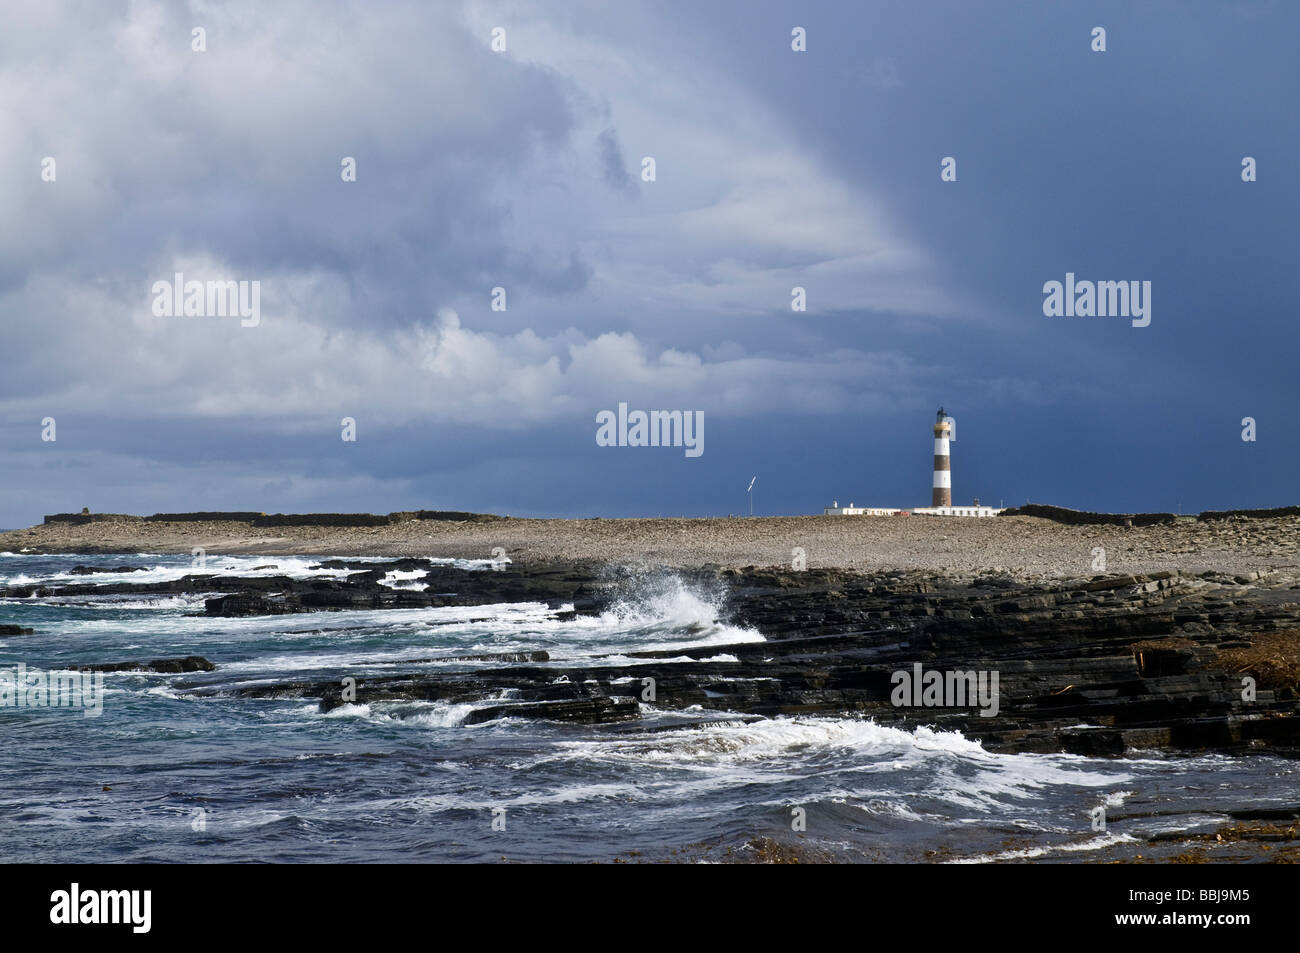 dh Garso Wick NORTH RONALDSAY ORKNEY Stormy skies rough seas North Ronaldsay Lighthouse sea uk coast islands storm rolling clouds Stock Photo